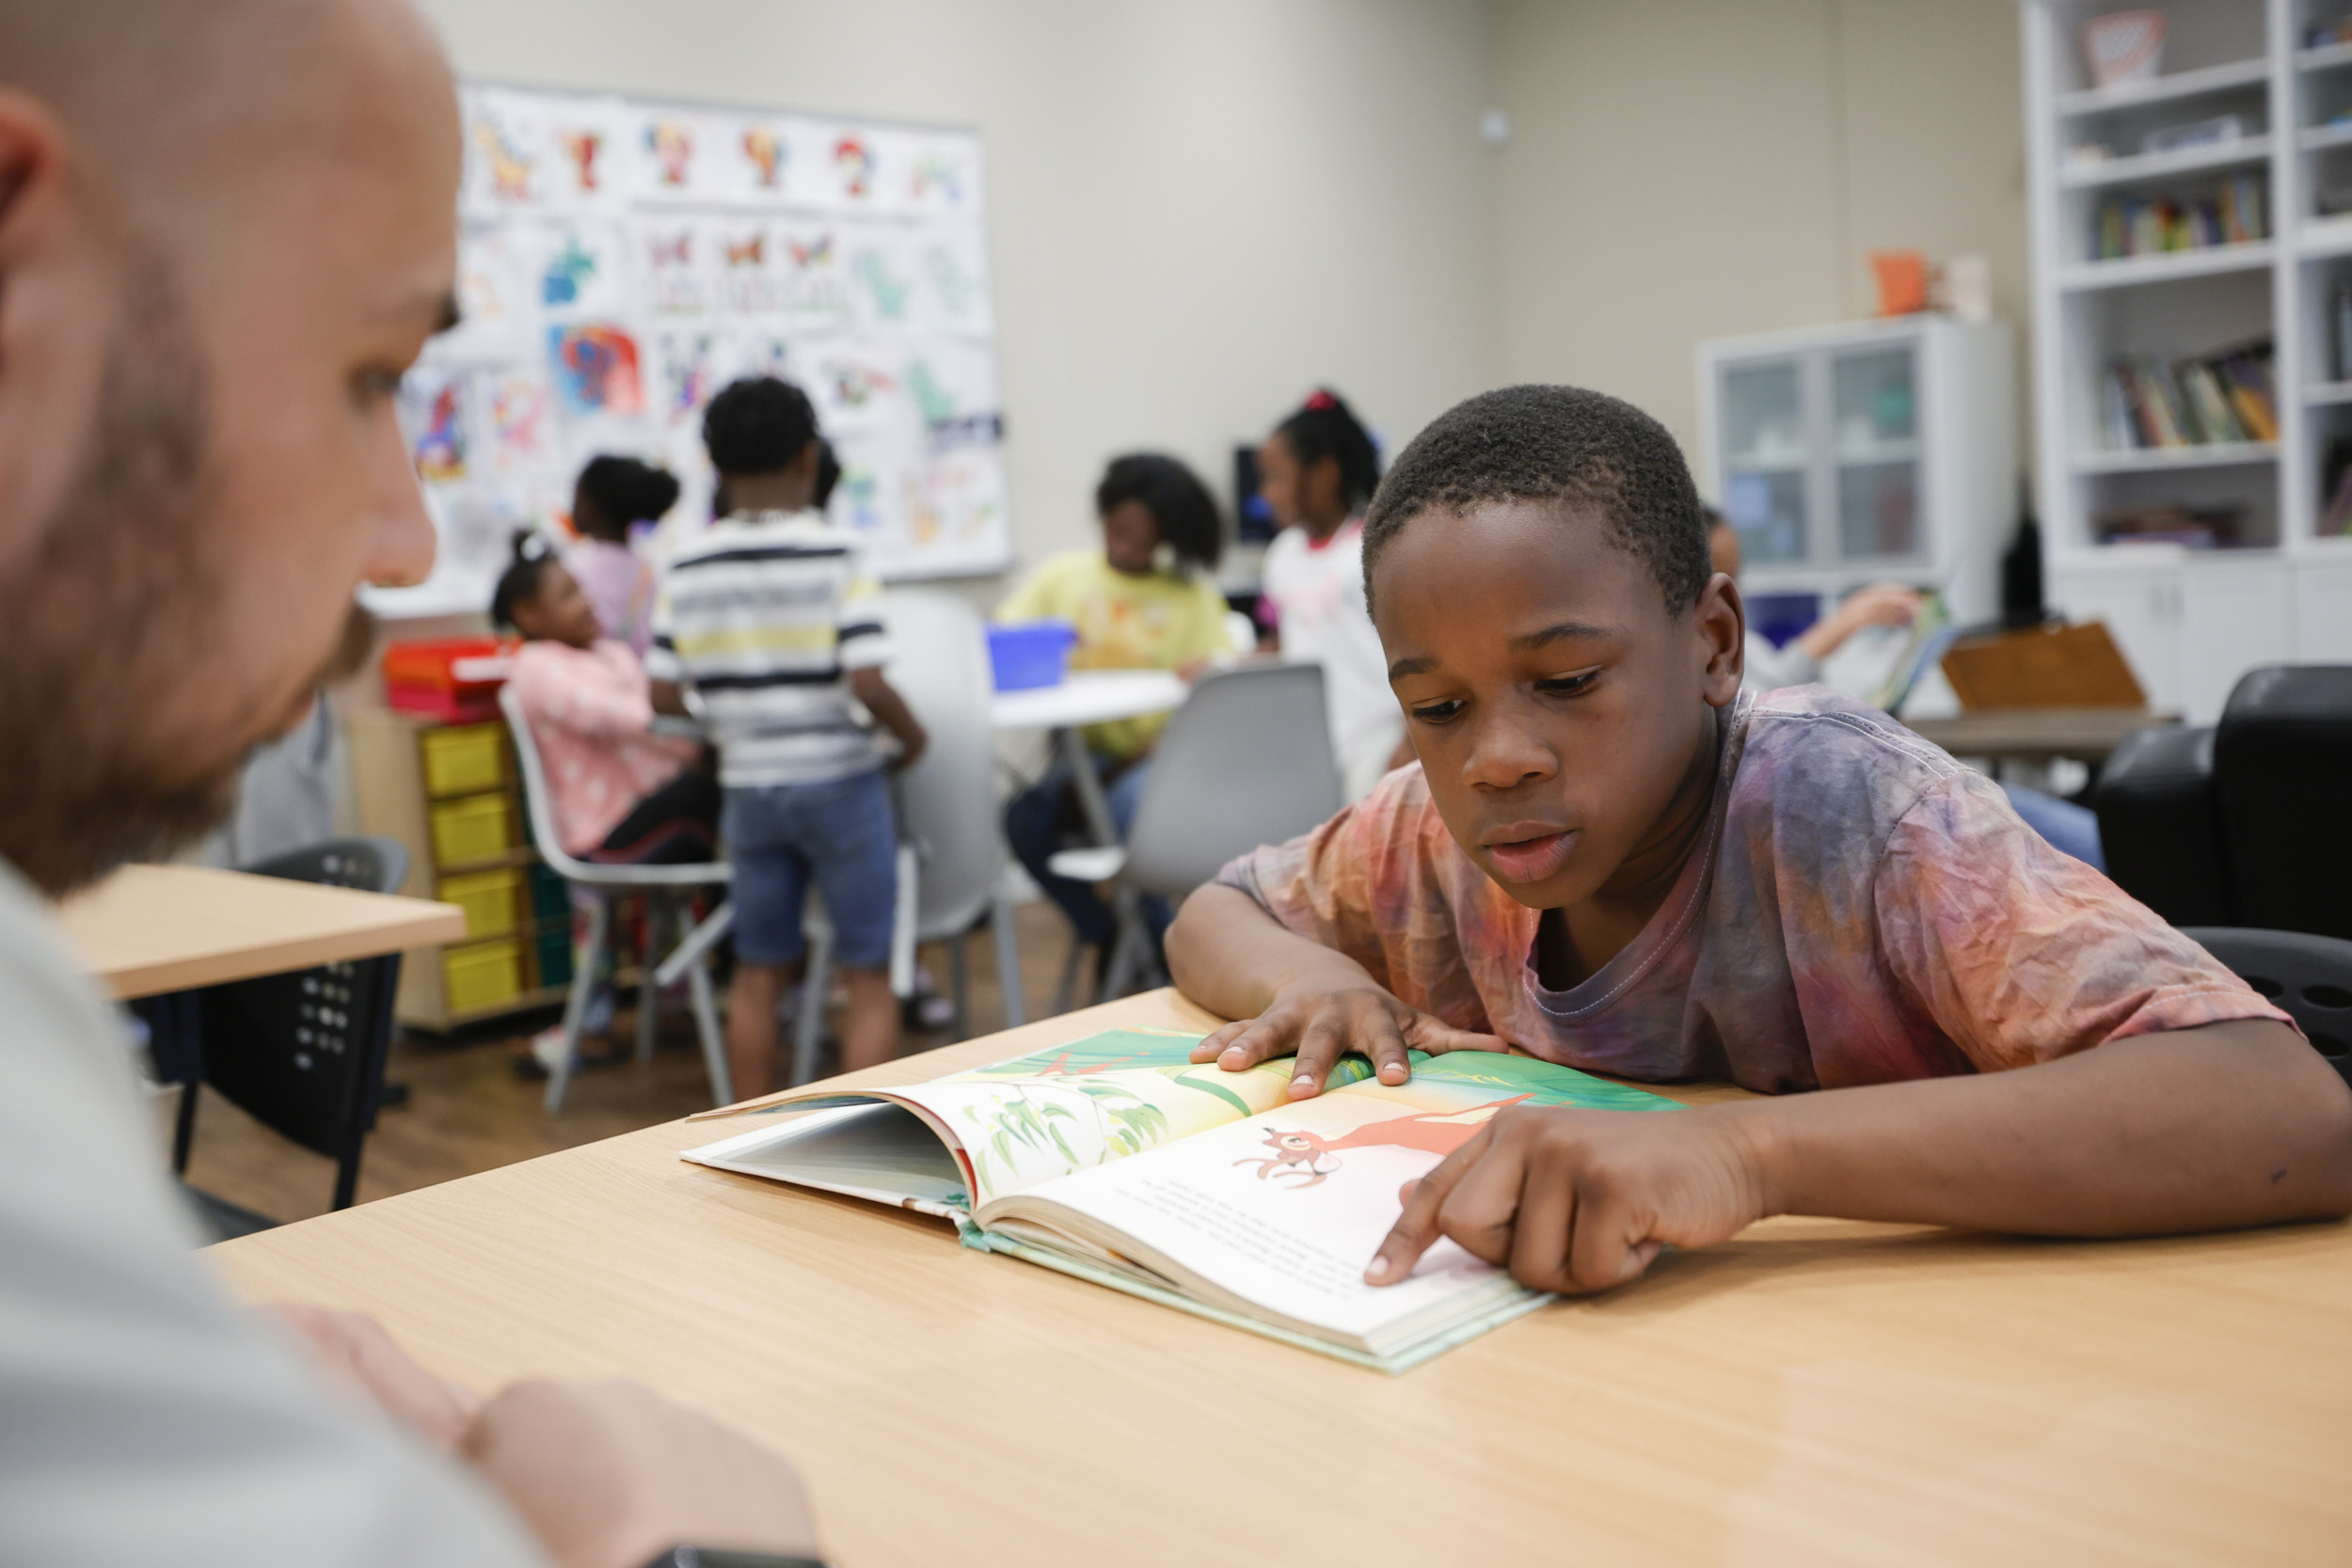 Reading: Young black boy sits at desk leaning forward with finger pointing to word in open workbook.